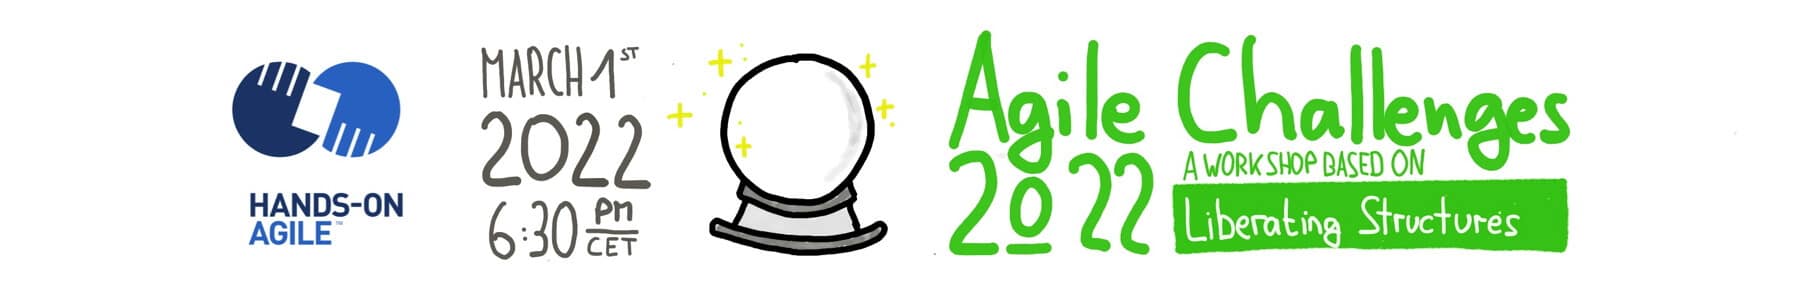 Hands-on Agile #39: Agile Challenges 2022 — Berlin Product People GmbH